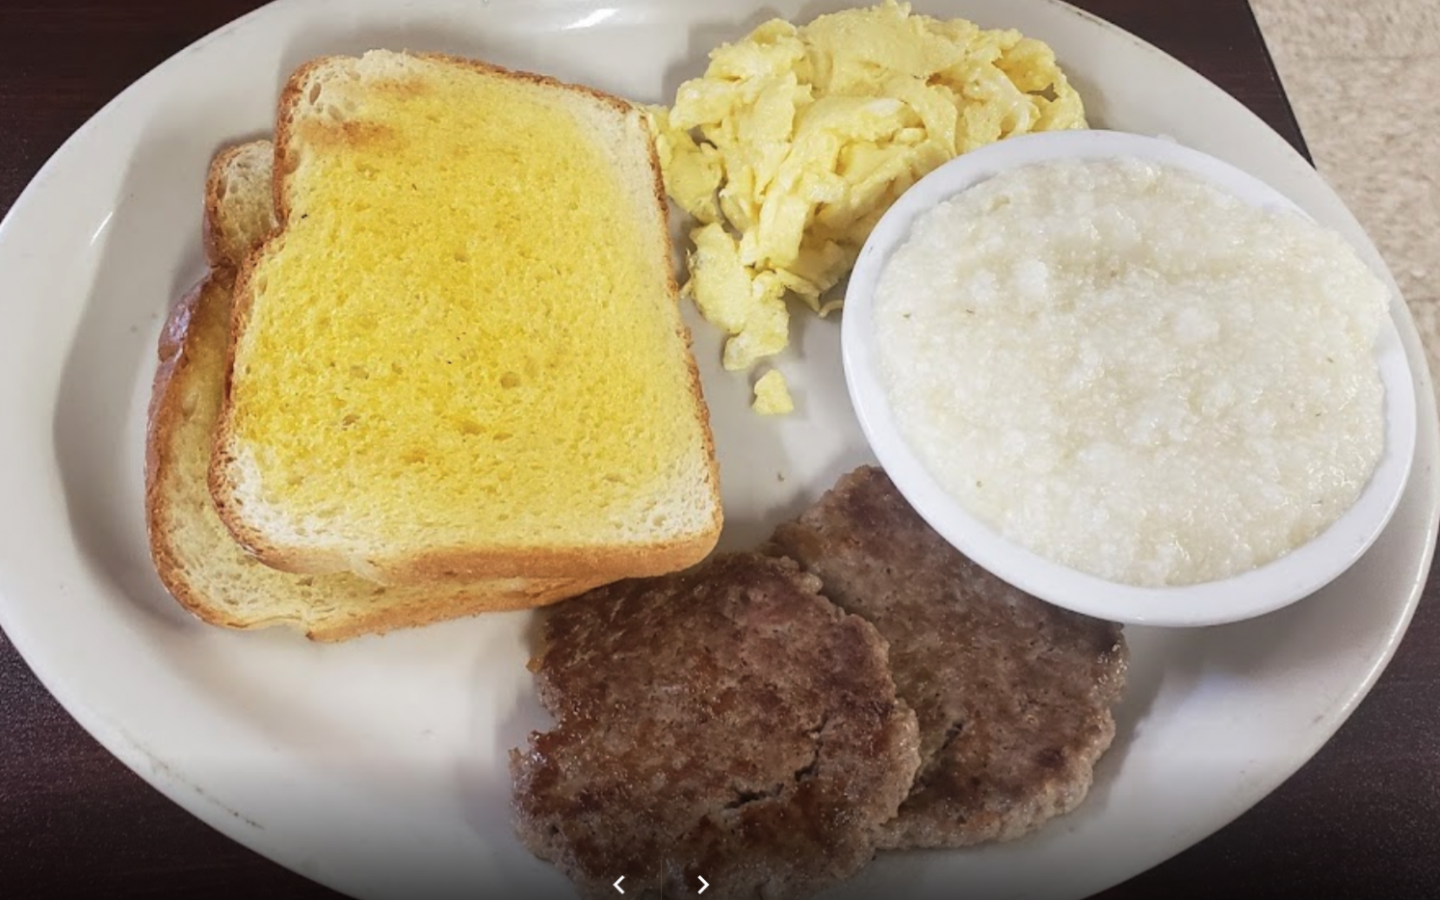 a plated country style breakfast with scrambled eggs, grits, sausage patties and buttered toast